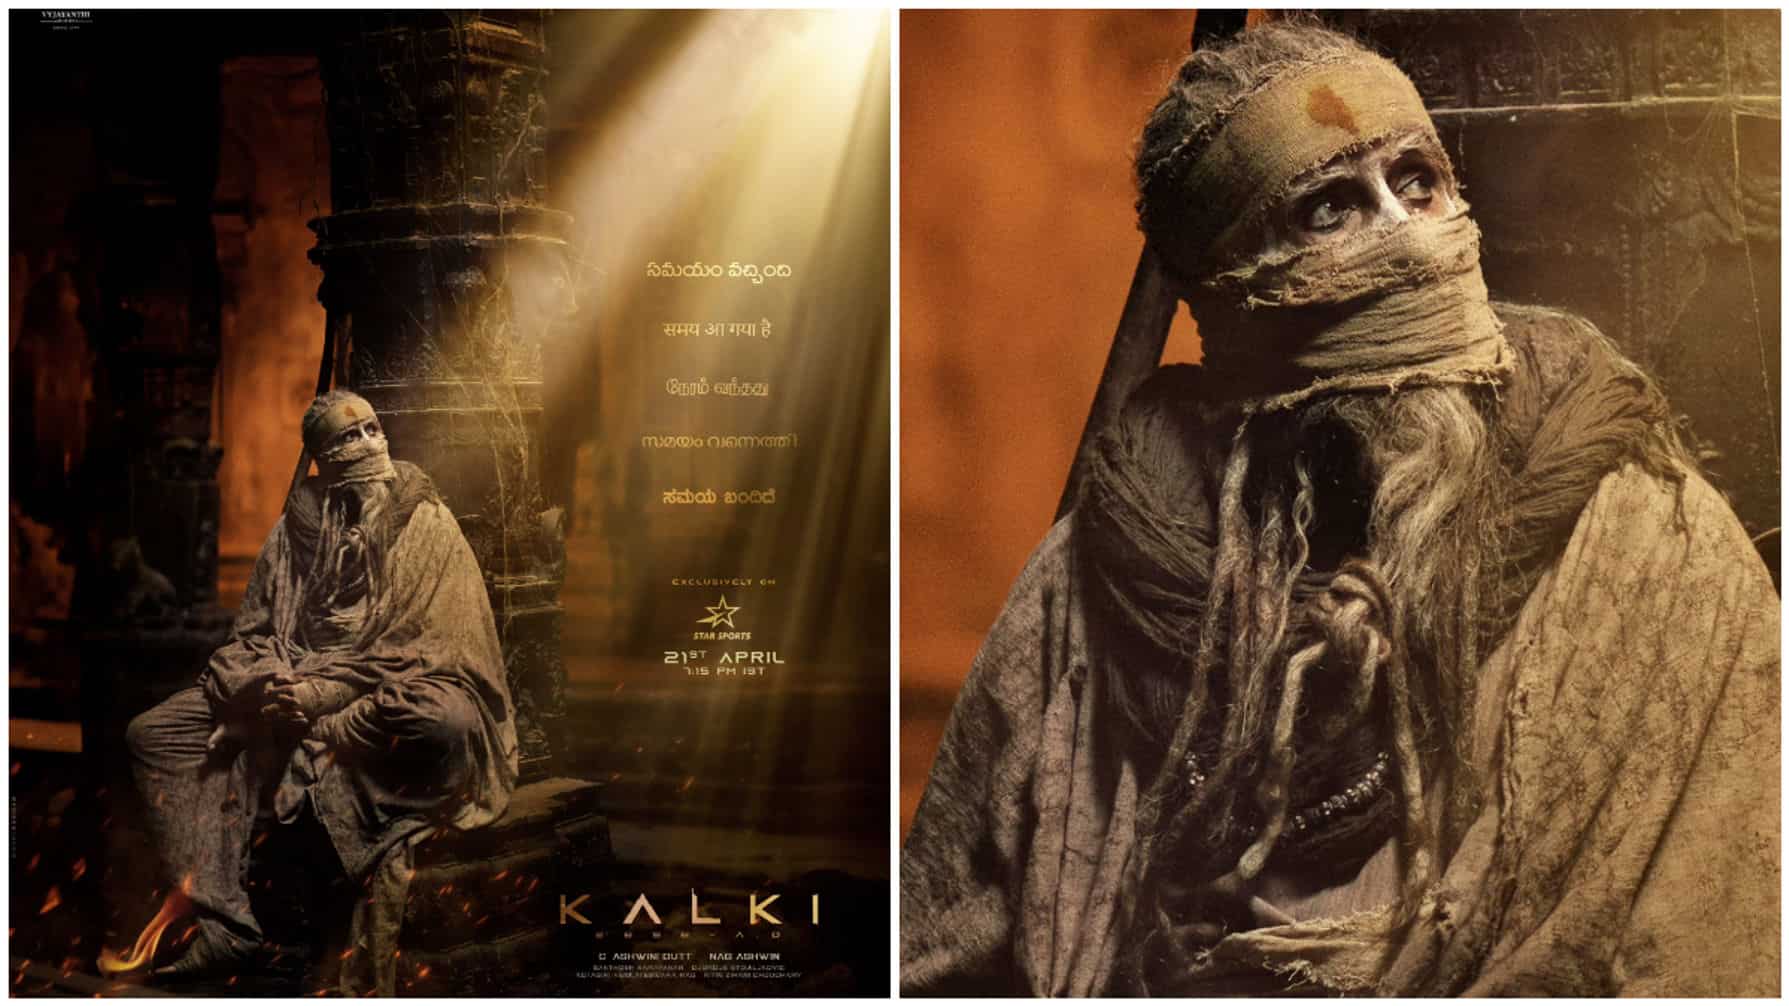 https://www.mobilemasala.com/movies/New-poster-of-Amitabh-Bachchan-starrer-Kalki-2898-AD-unveiled-Heres-more-on-what-you-can-look-forward-to-on-April-21-i256076